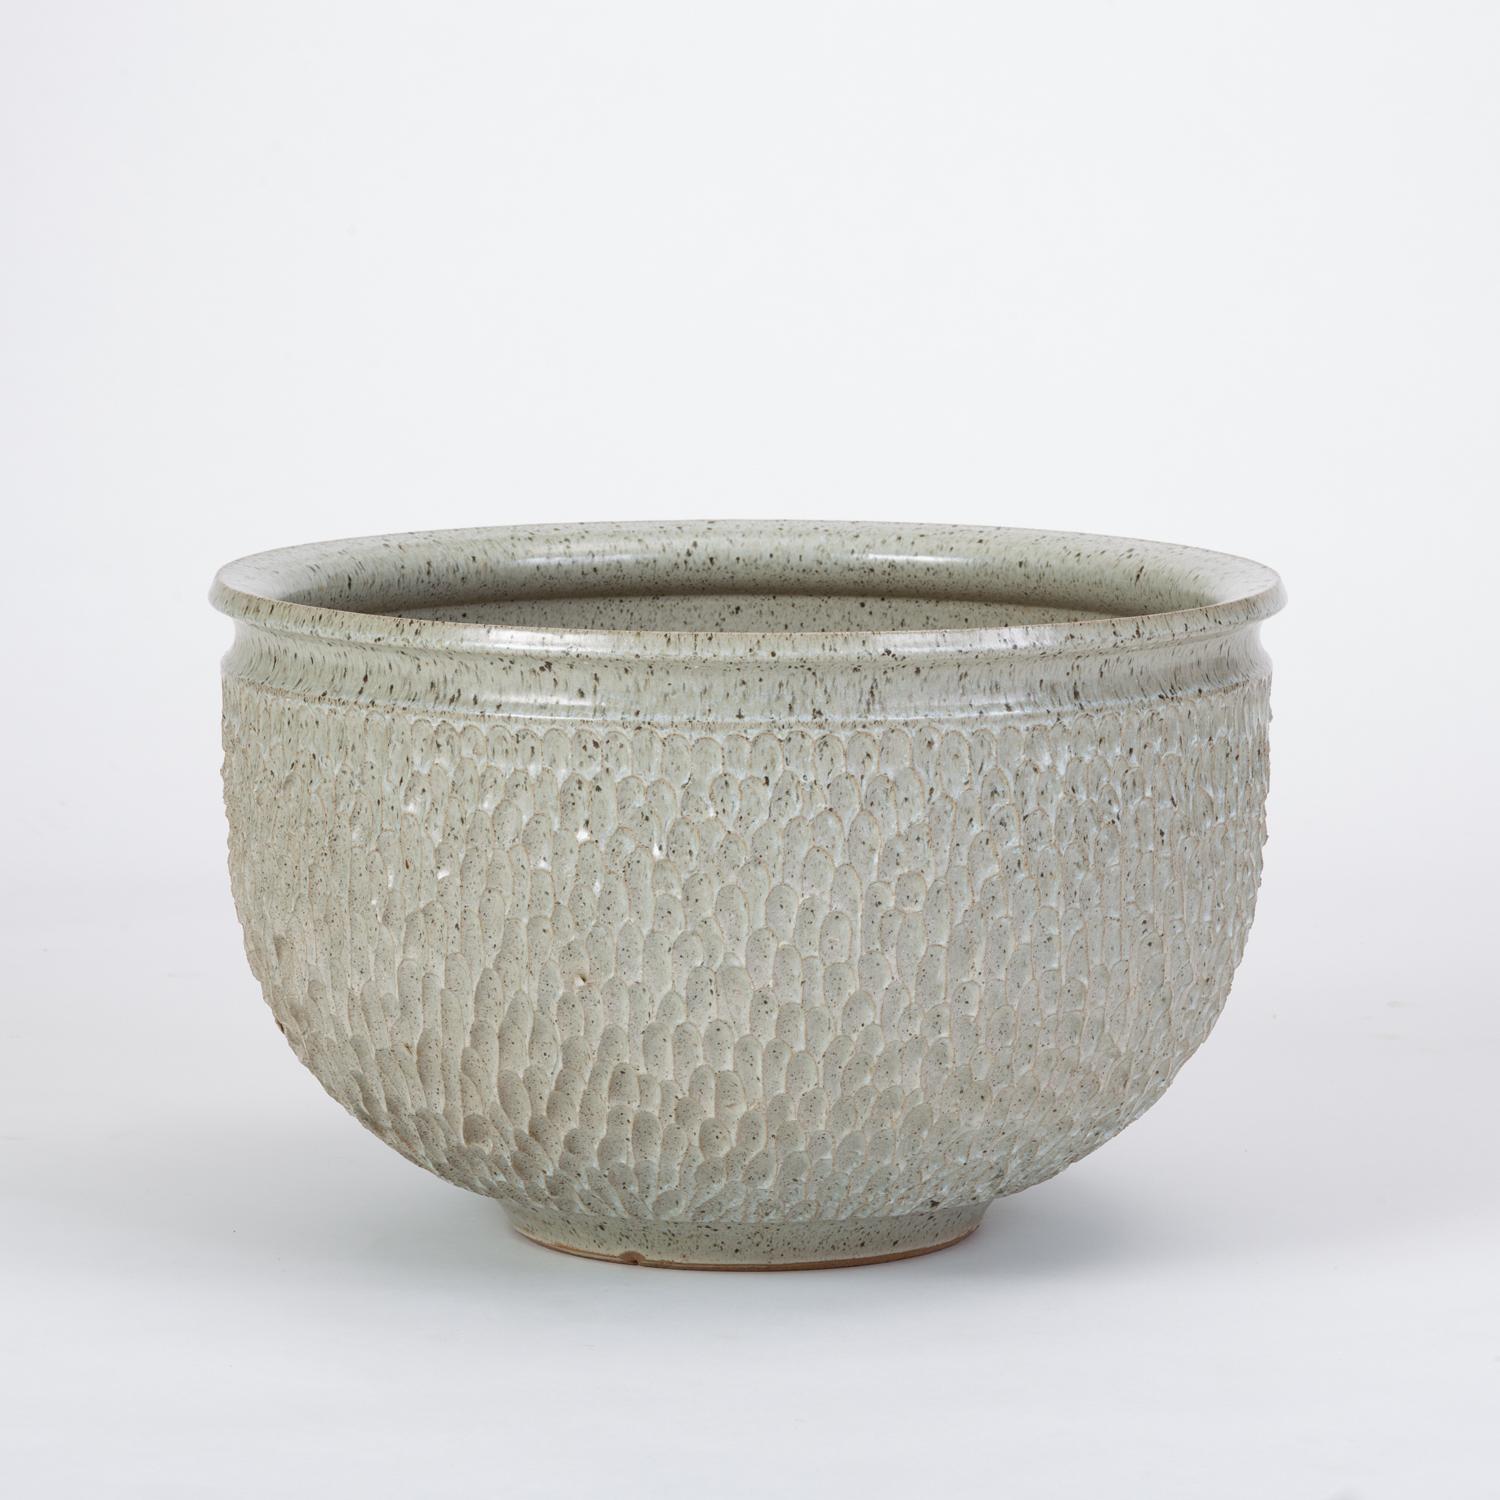 Glazed Earthgender ‘Pebble’ Textured Bowl Planter by David Cressey and Robert Maxwell